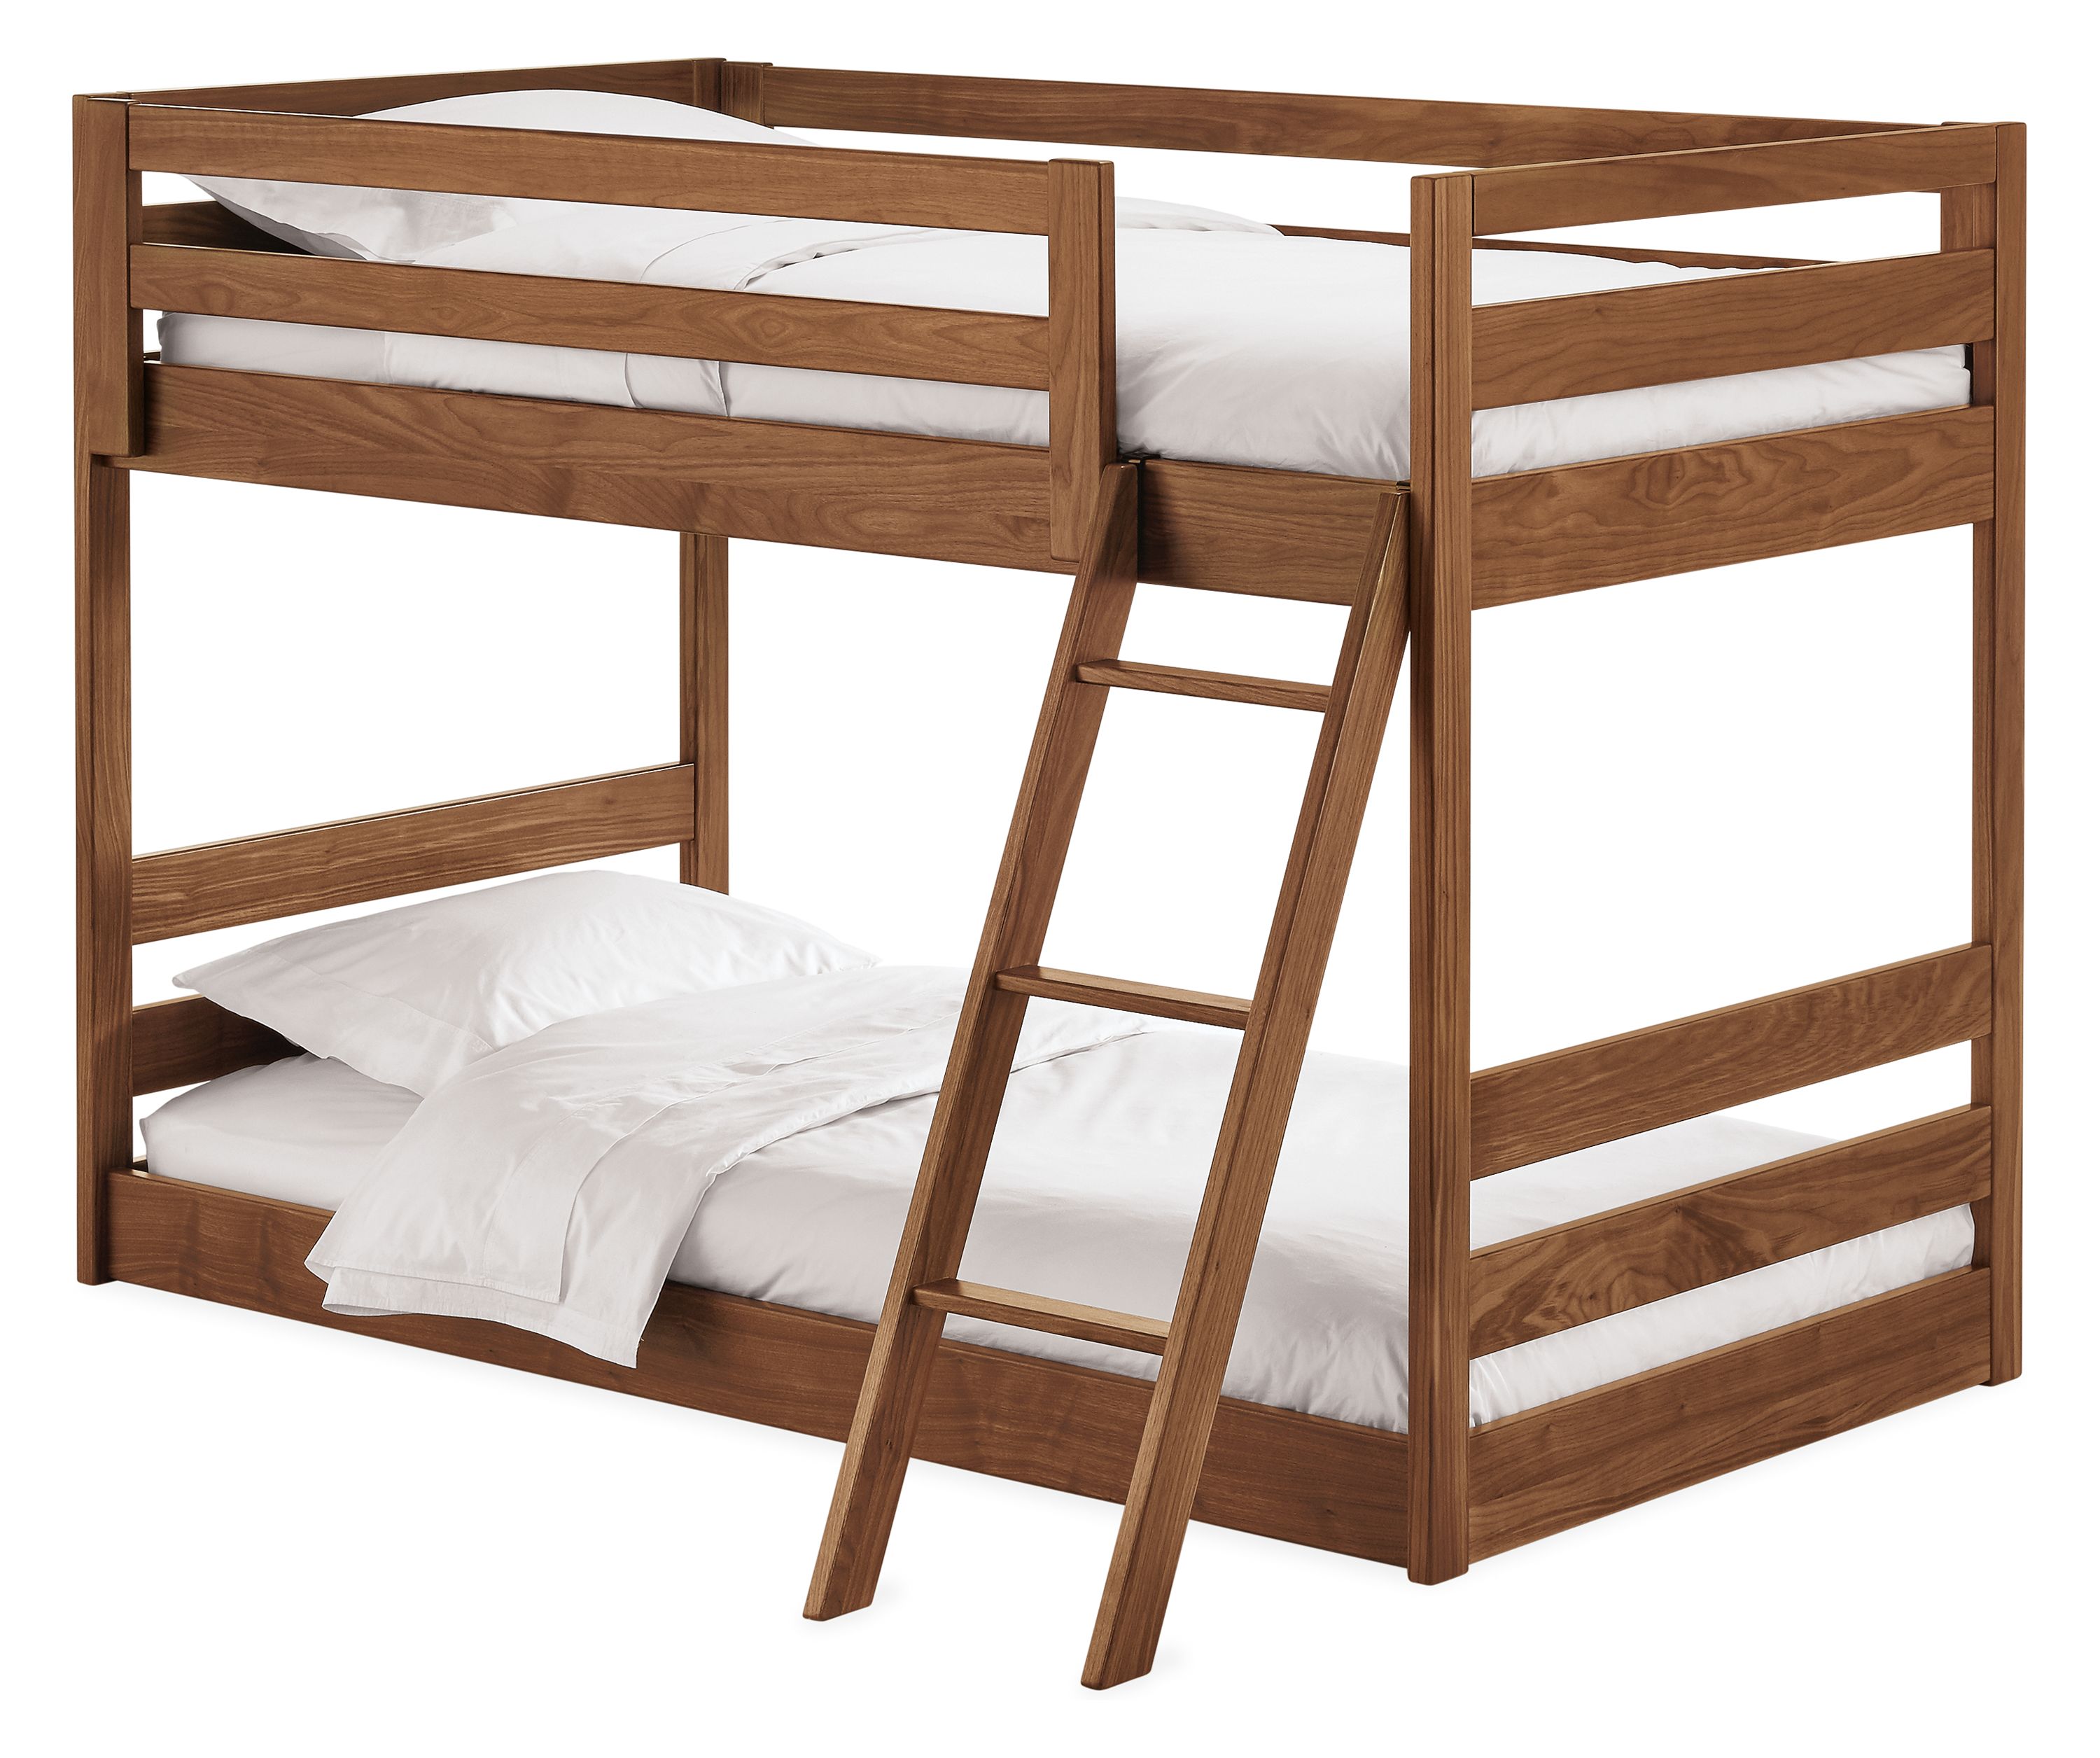 Waverly Bunk Beds Twin Over, Room And Board Bunk Beds